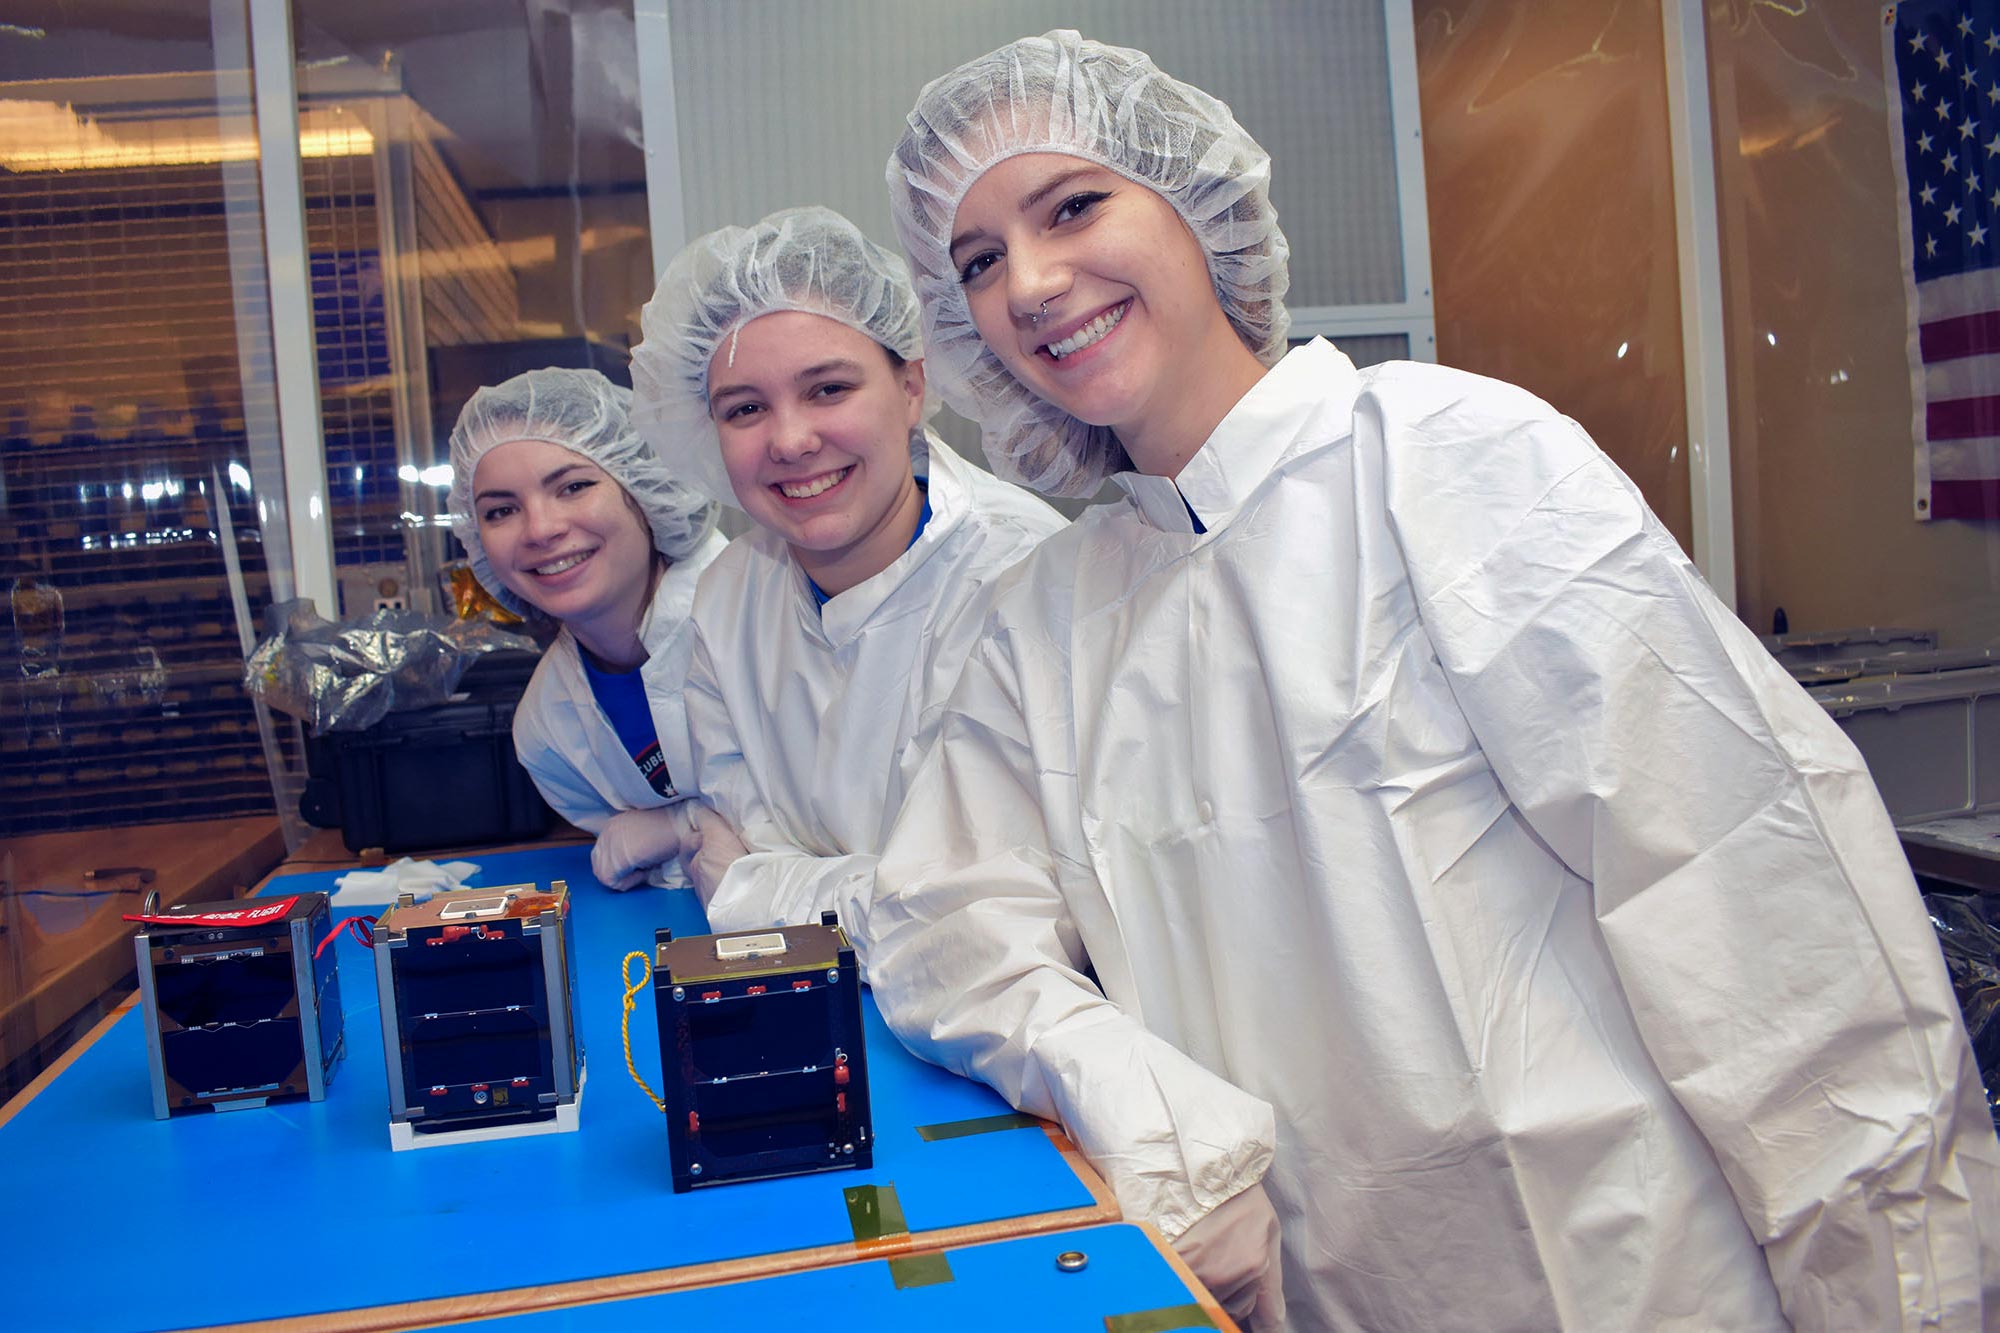 Erin Puckette, center, stands with two others at a table with full lab coats and hair nets